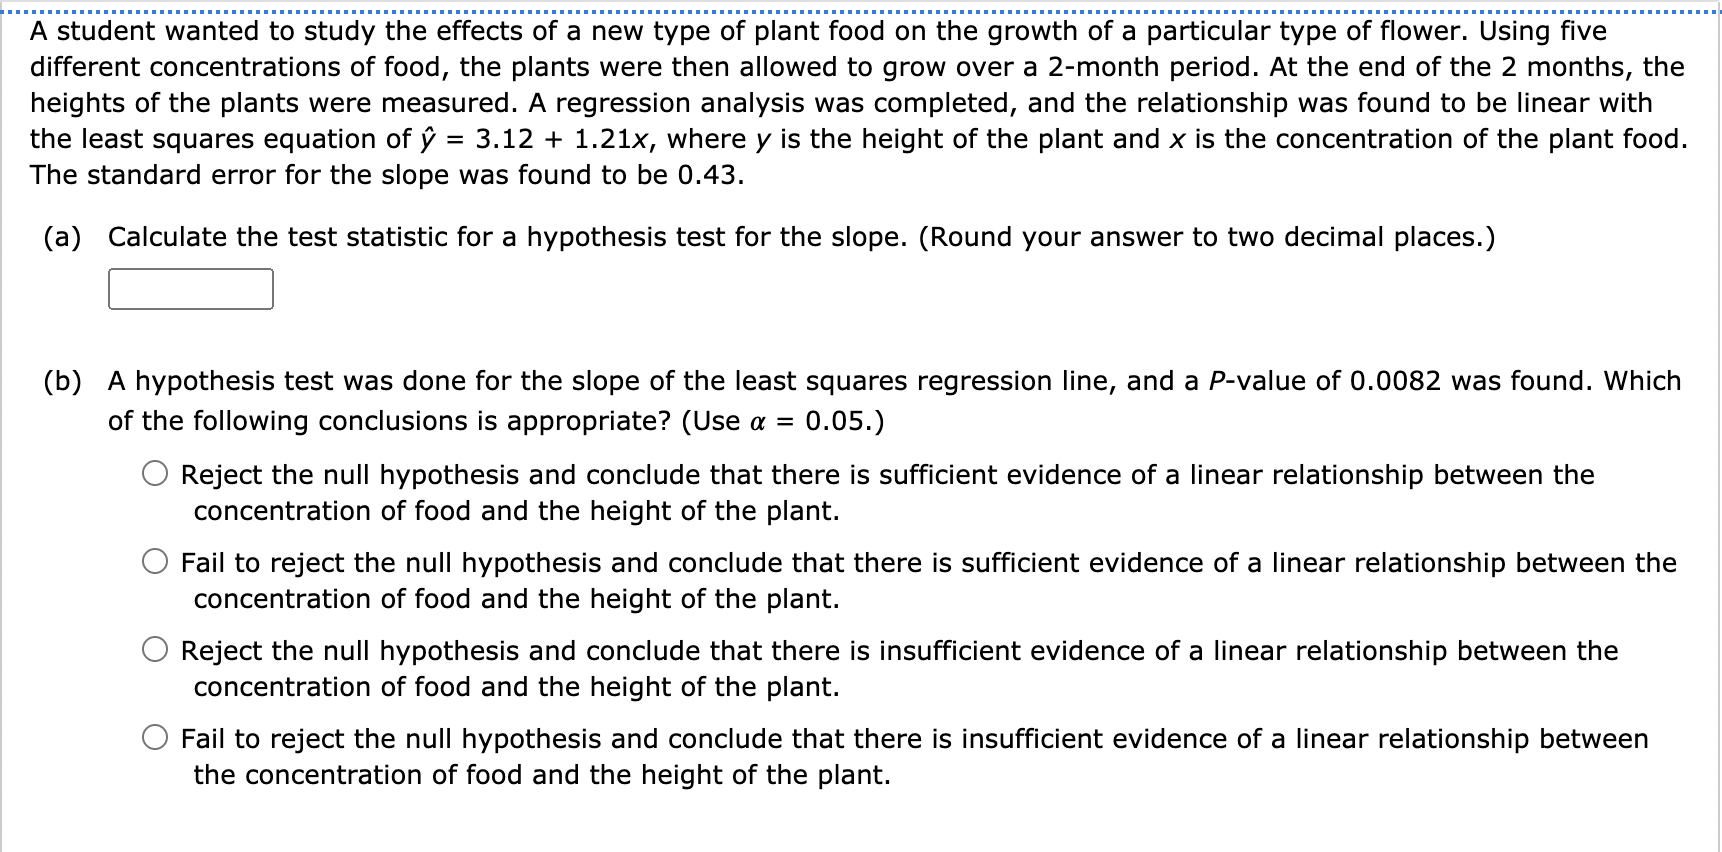 Leena wanted to study about the growth of plants and decided to